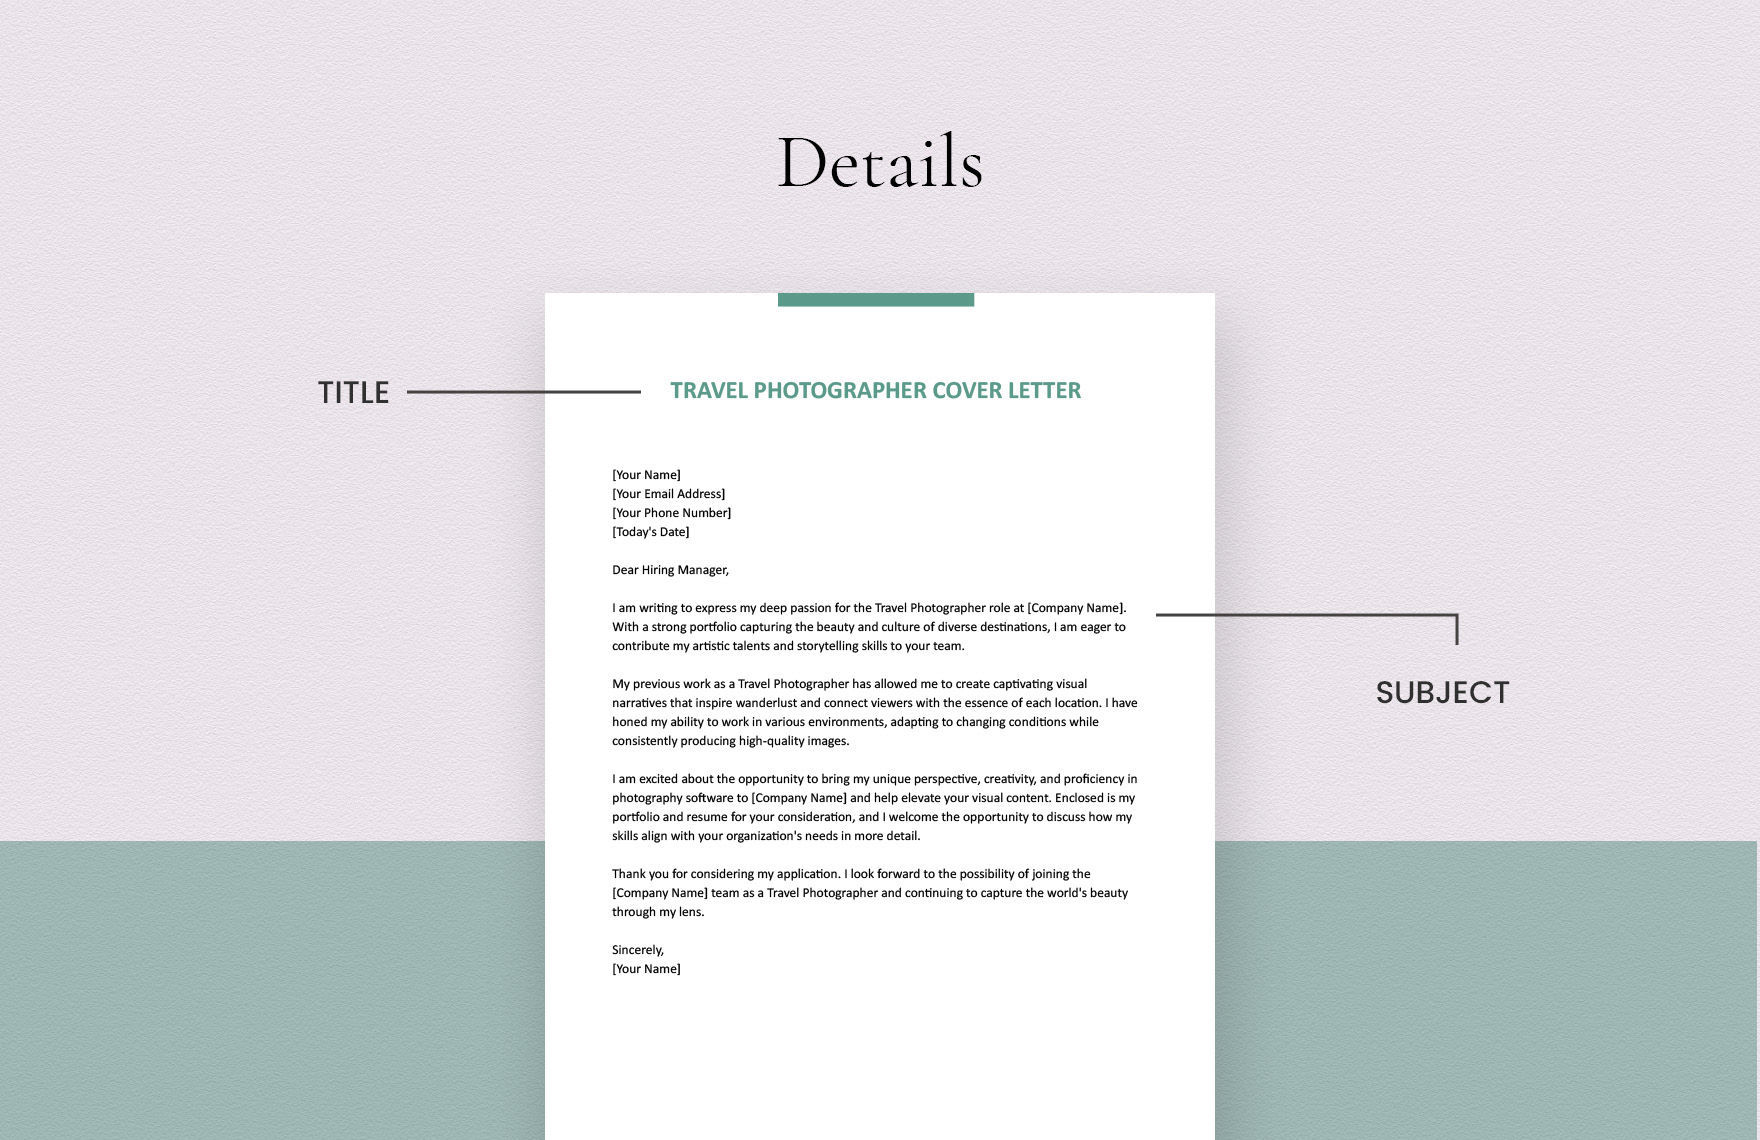 Technical Trainer Cover Letter